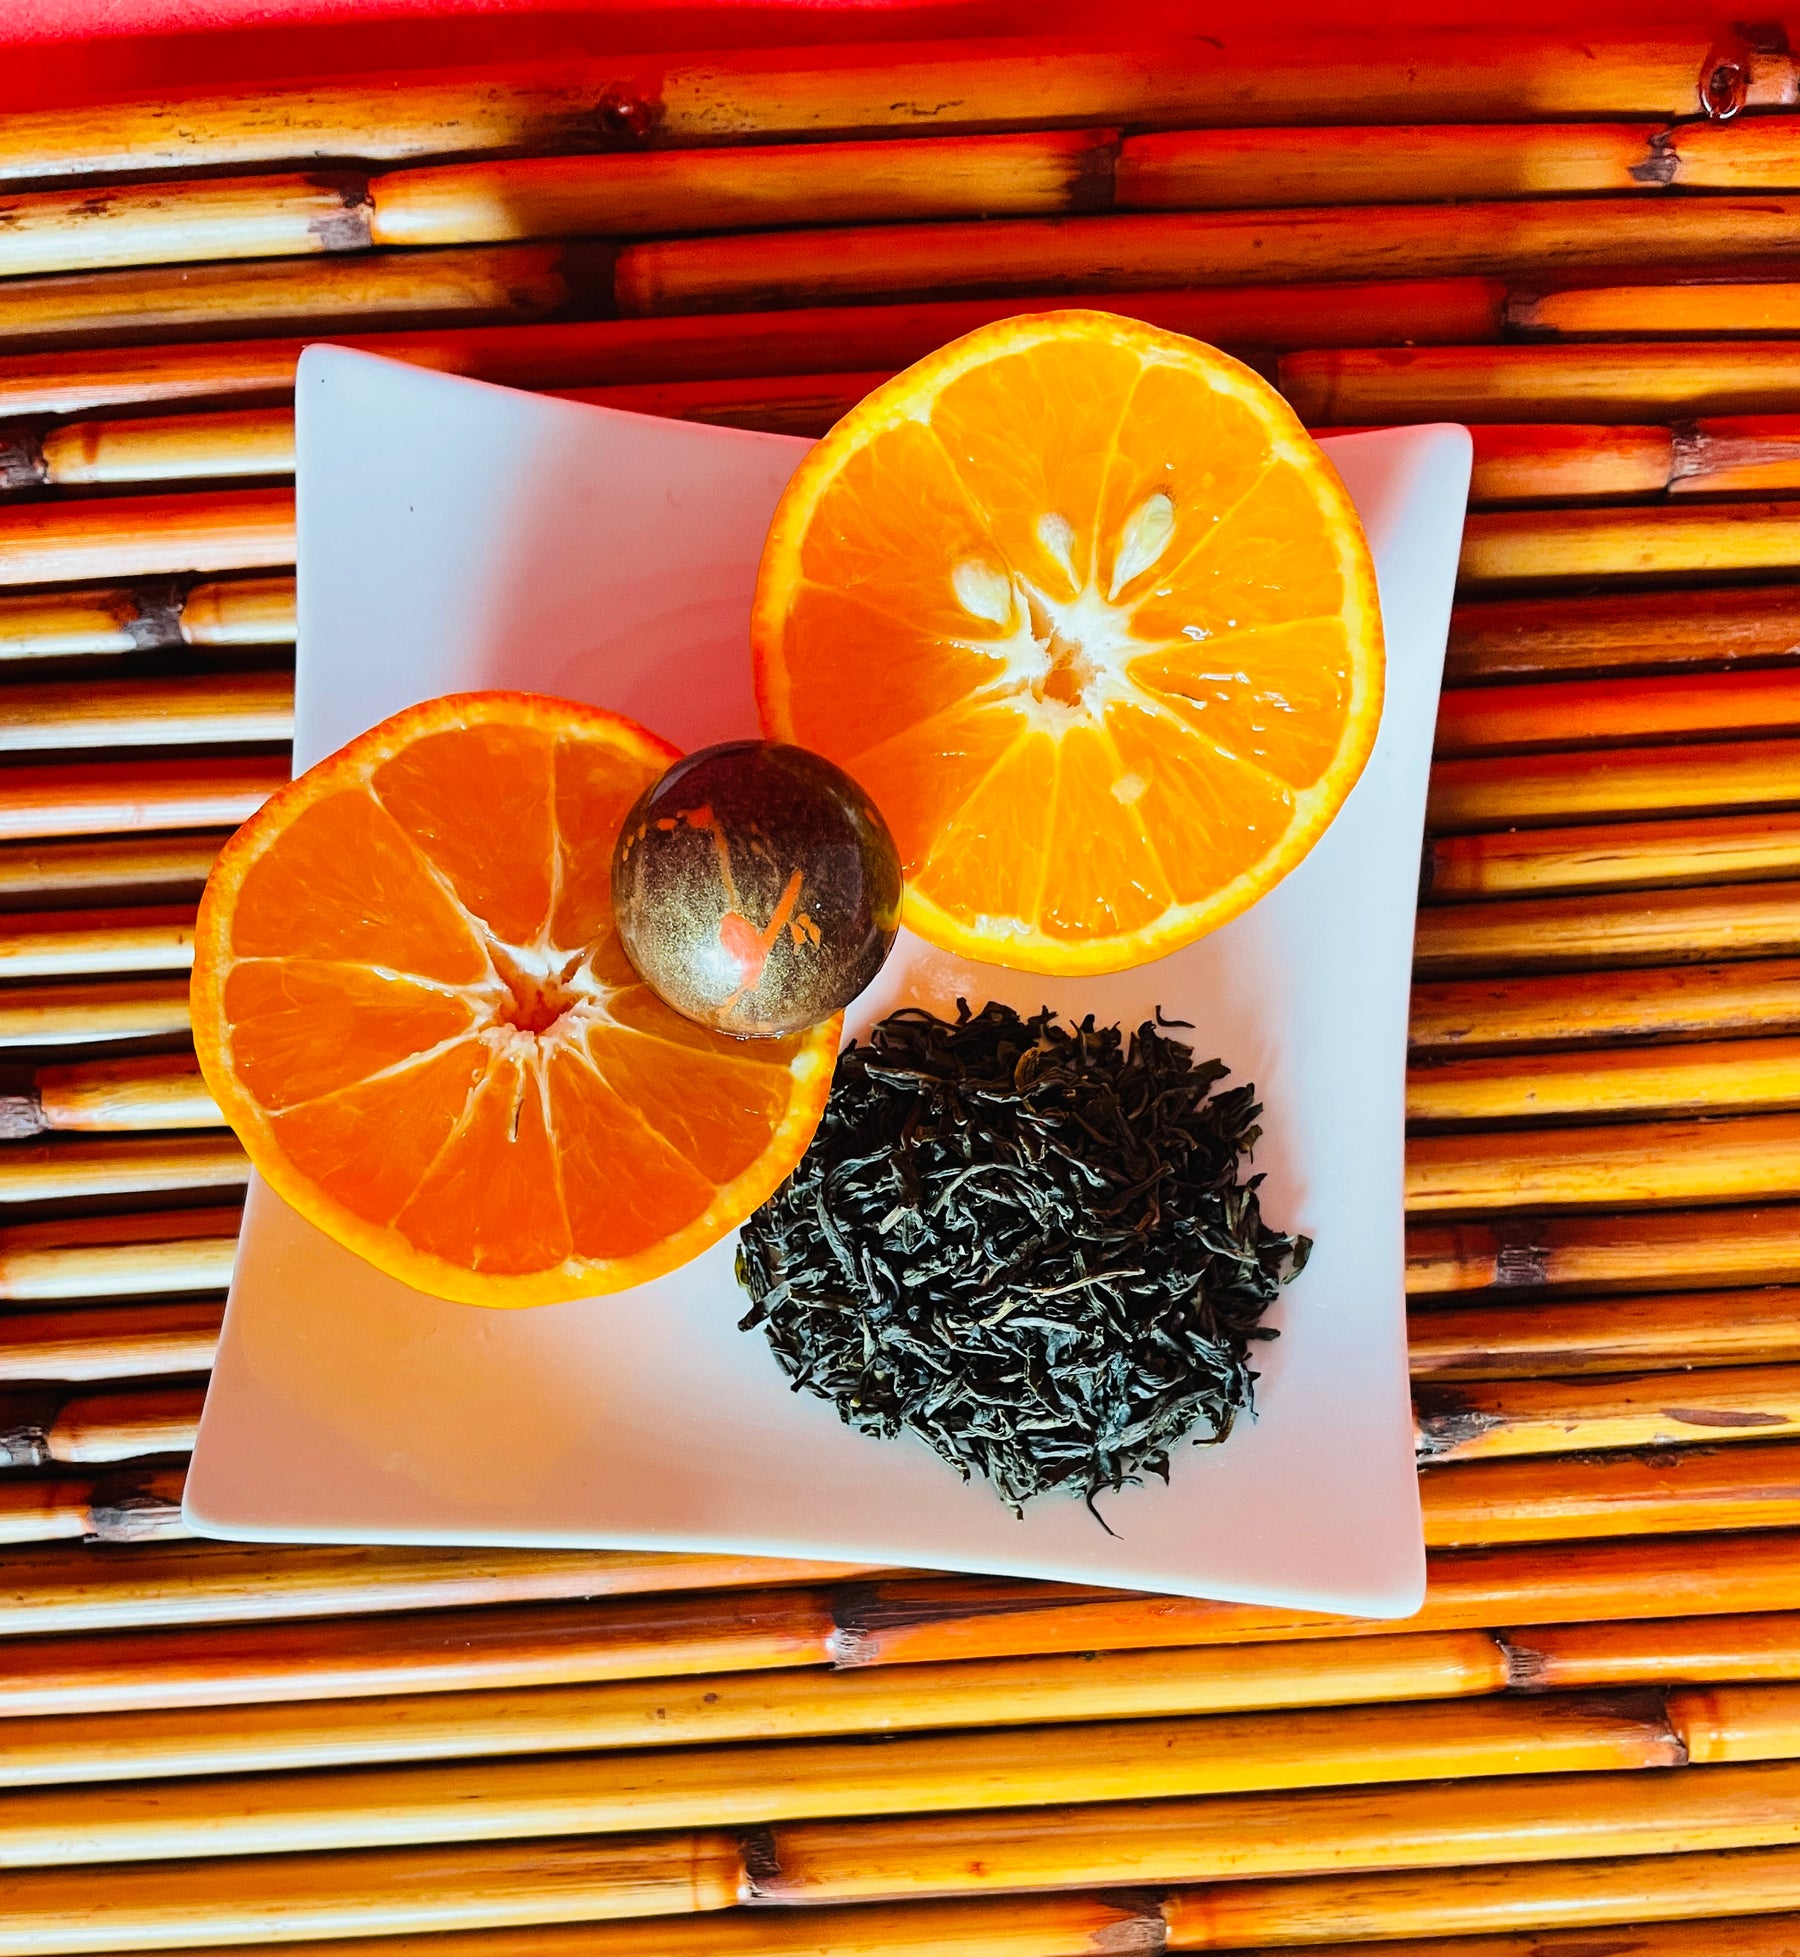 Experience the Ultimate Indulgence with our new Orange Liqueur Infused Bonbon, perfect for celebrating Lunar New Year